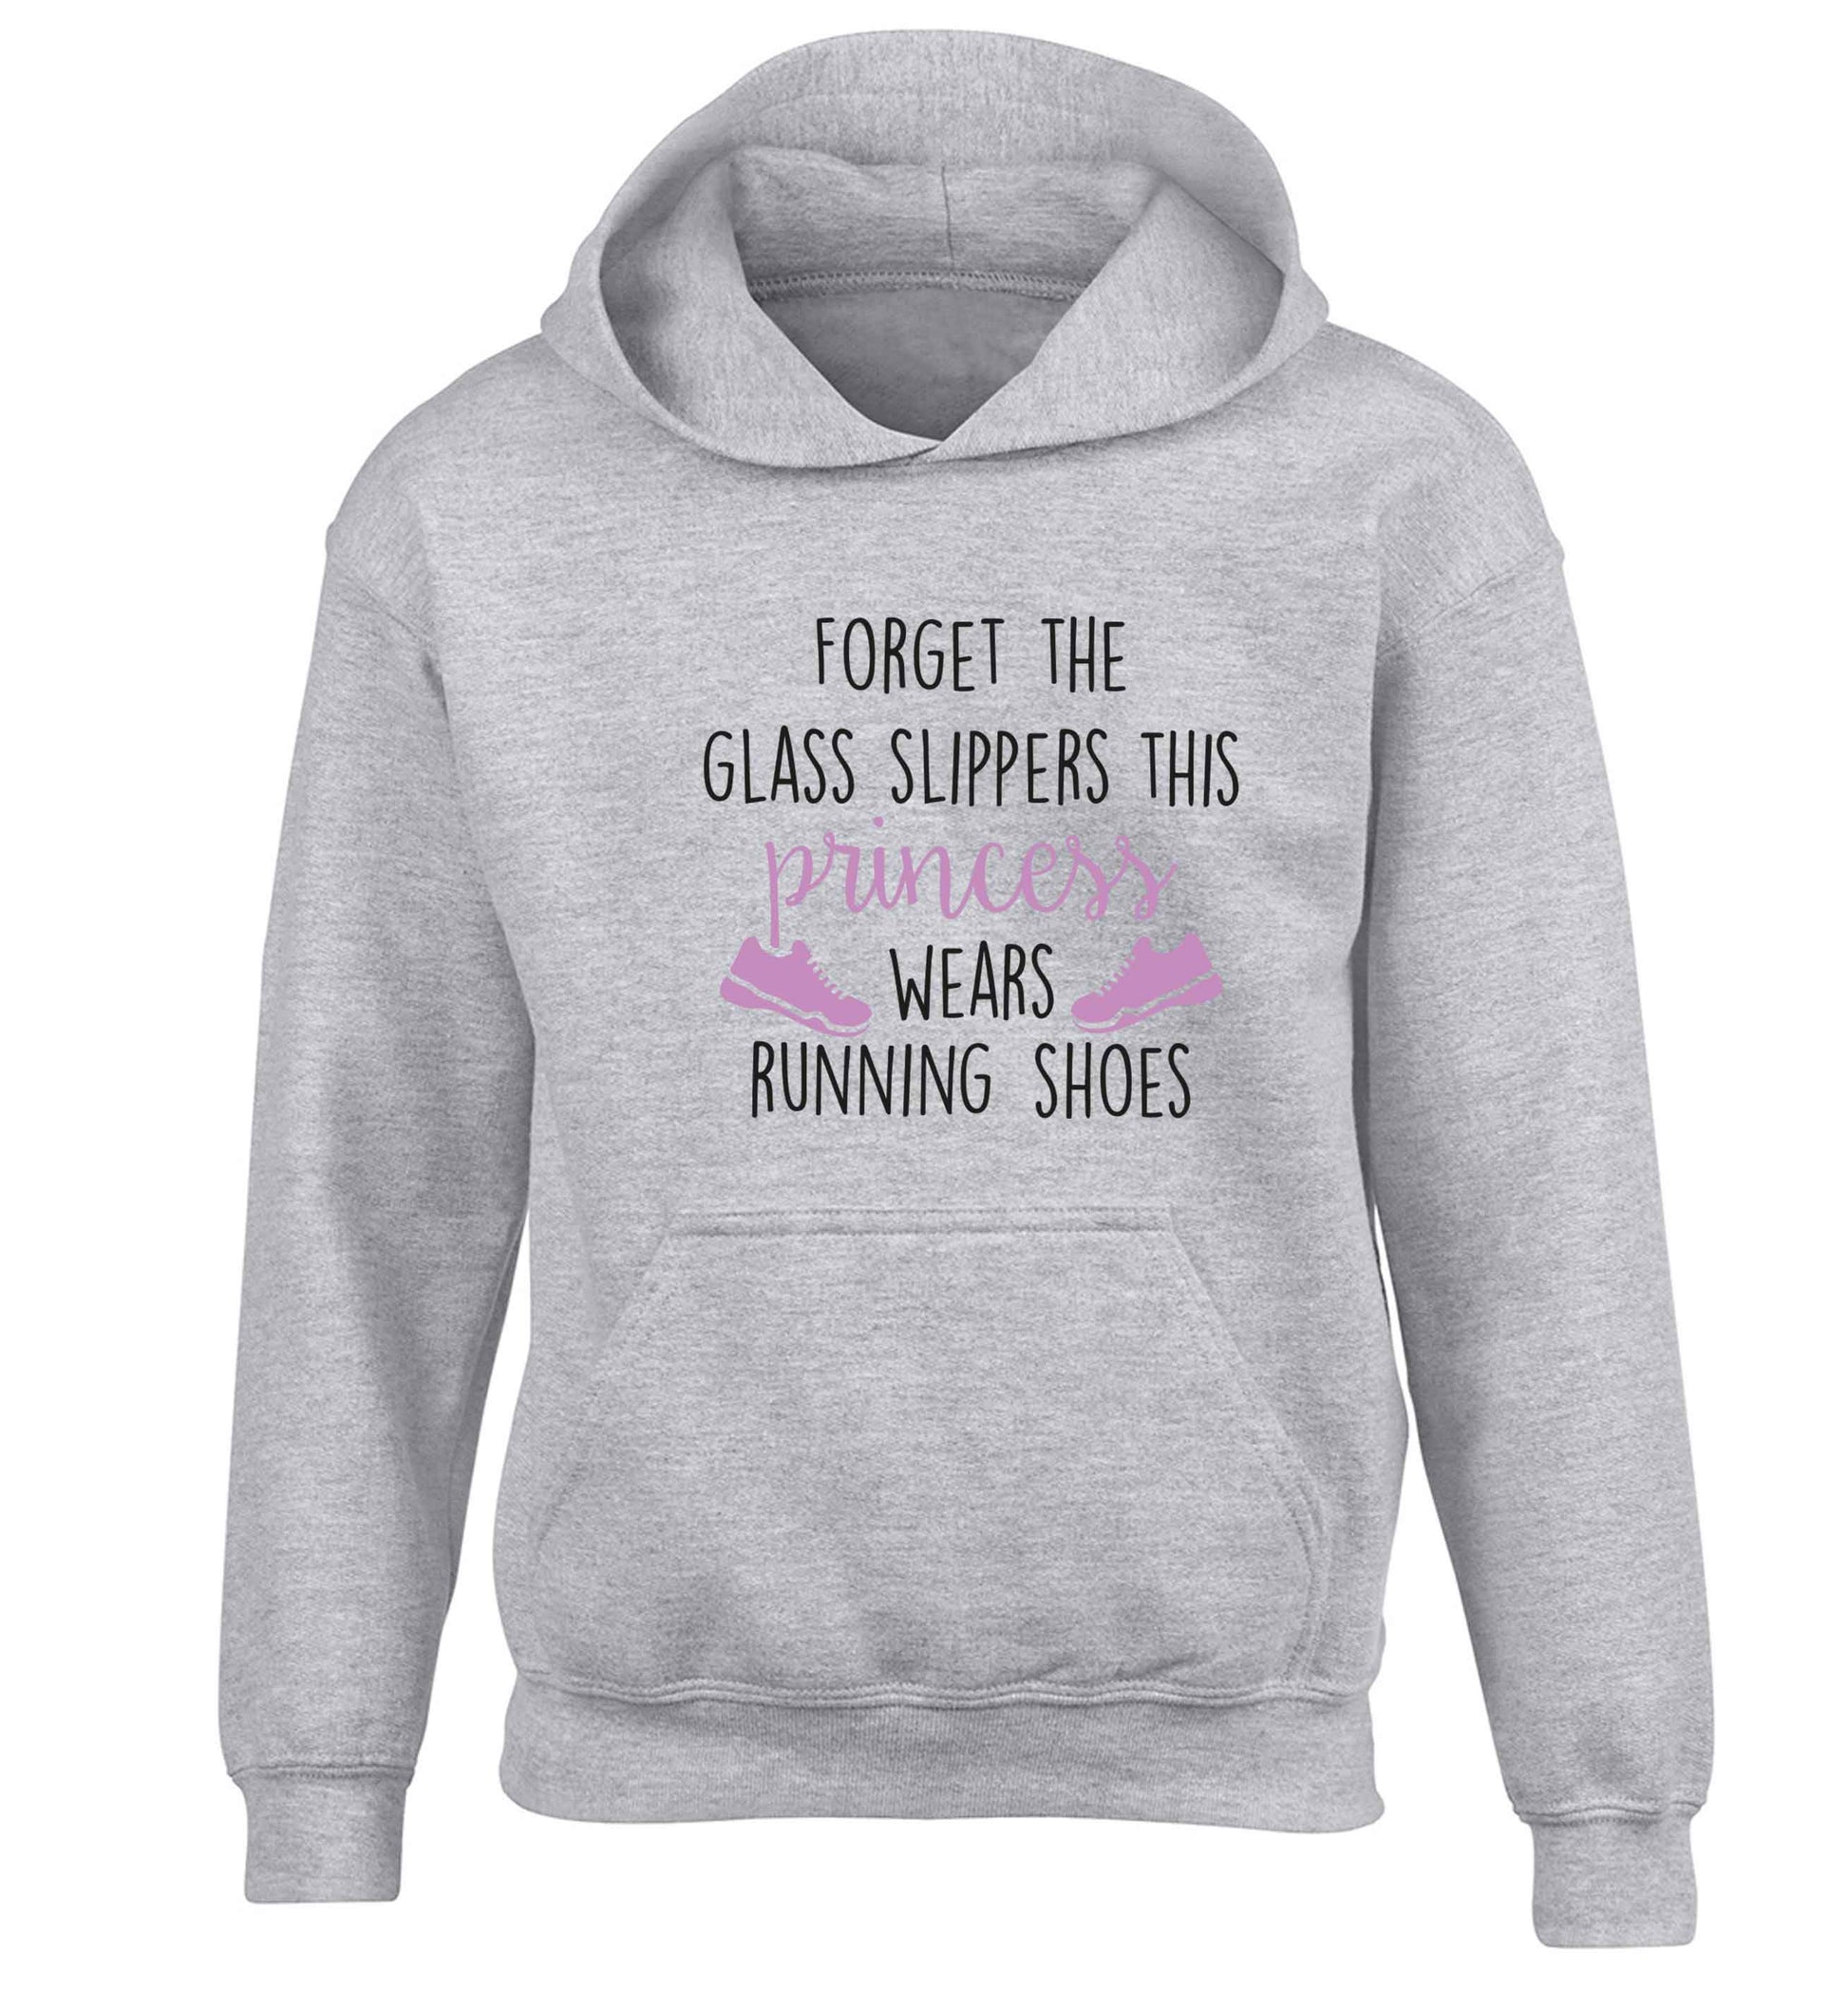 Forget the glass slippers this princess wears running shoes children's grey hoodie 12-13 Years